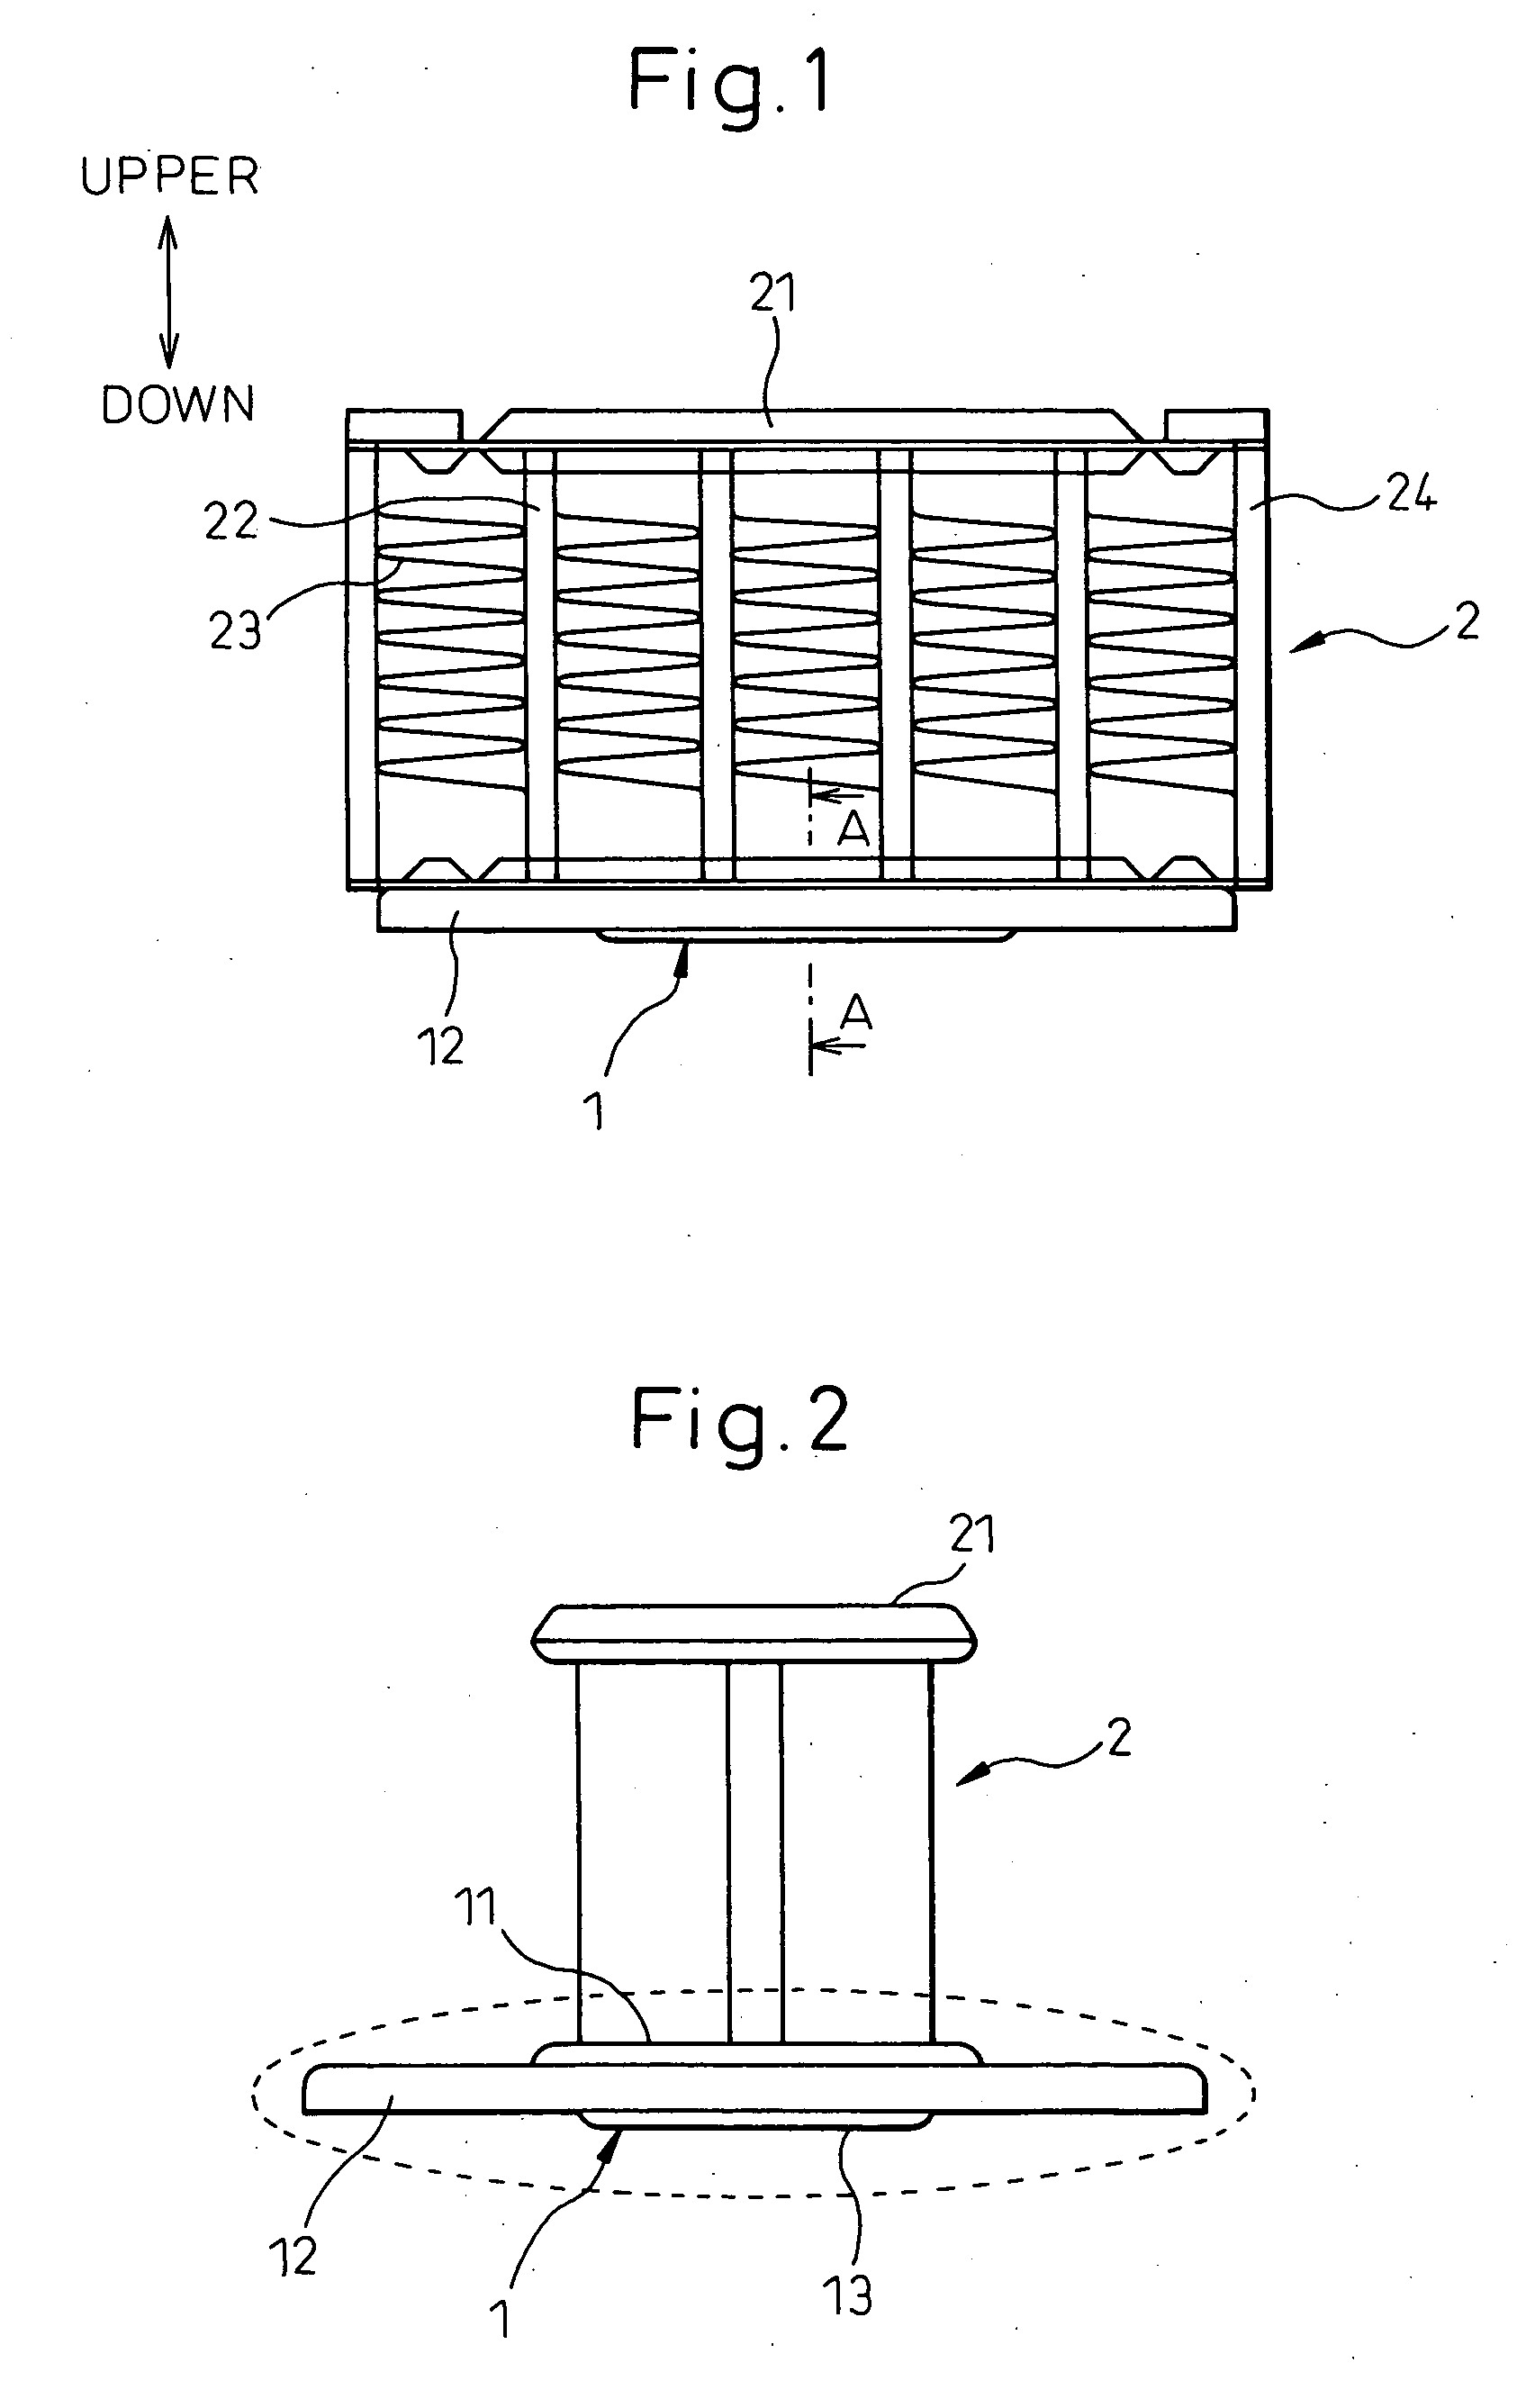 Boiling and cooling device